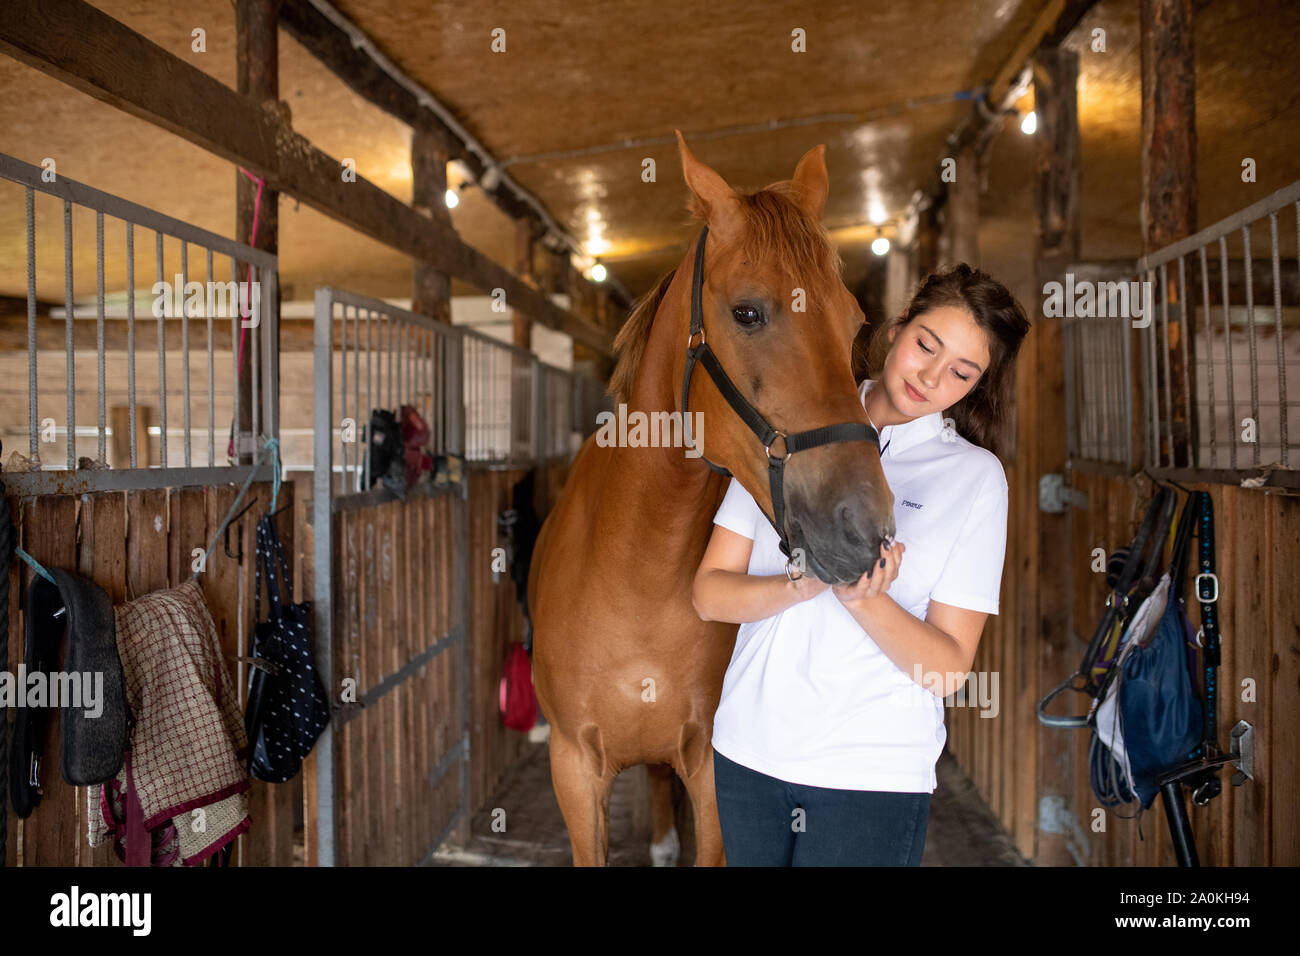 Young active woman in white shirt standing inside stable by purebred racehorse Stock Photo